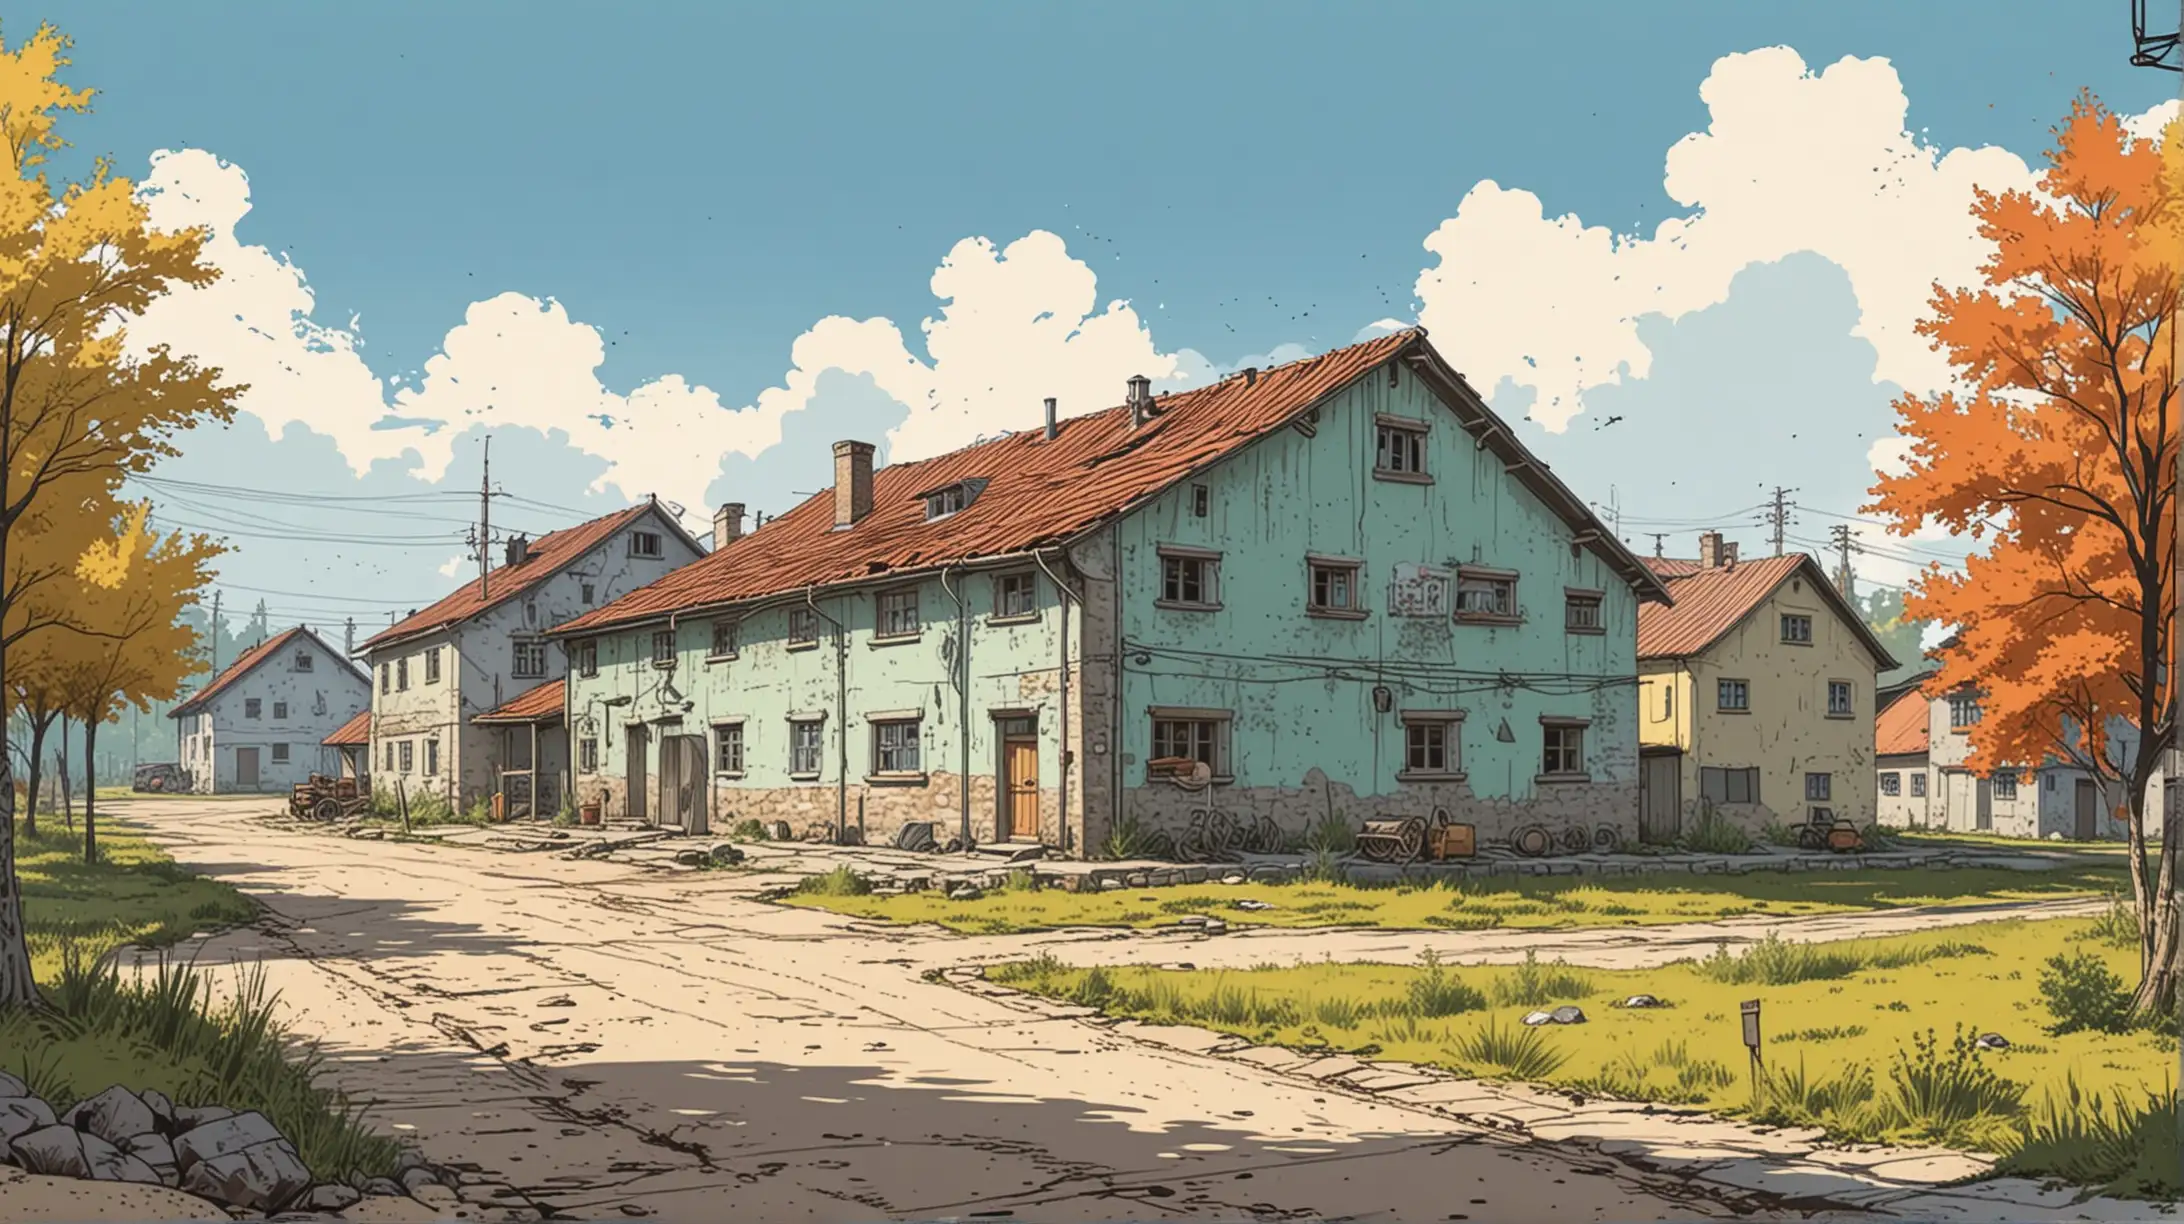 WW2 Era Village Concealing a Provision Production Center in Comic Style